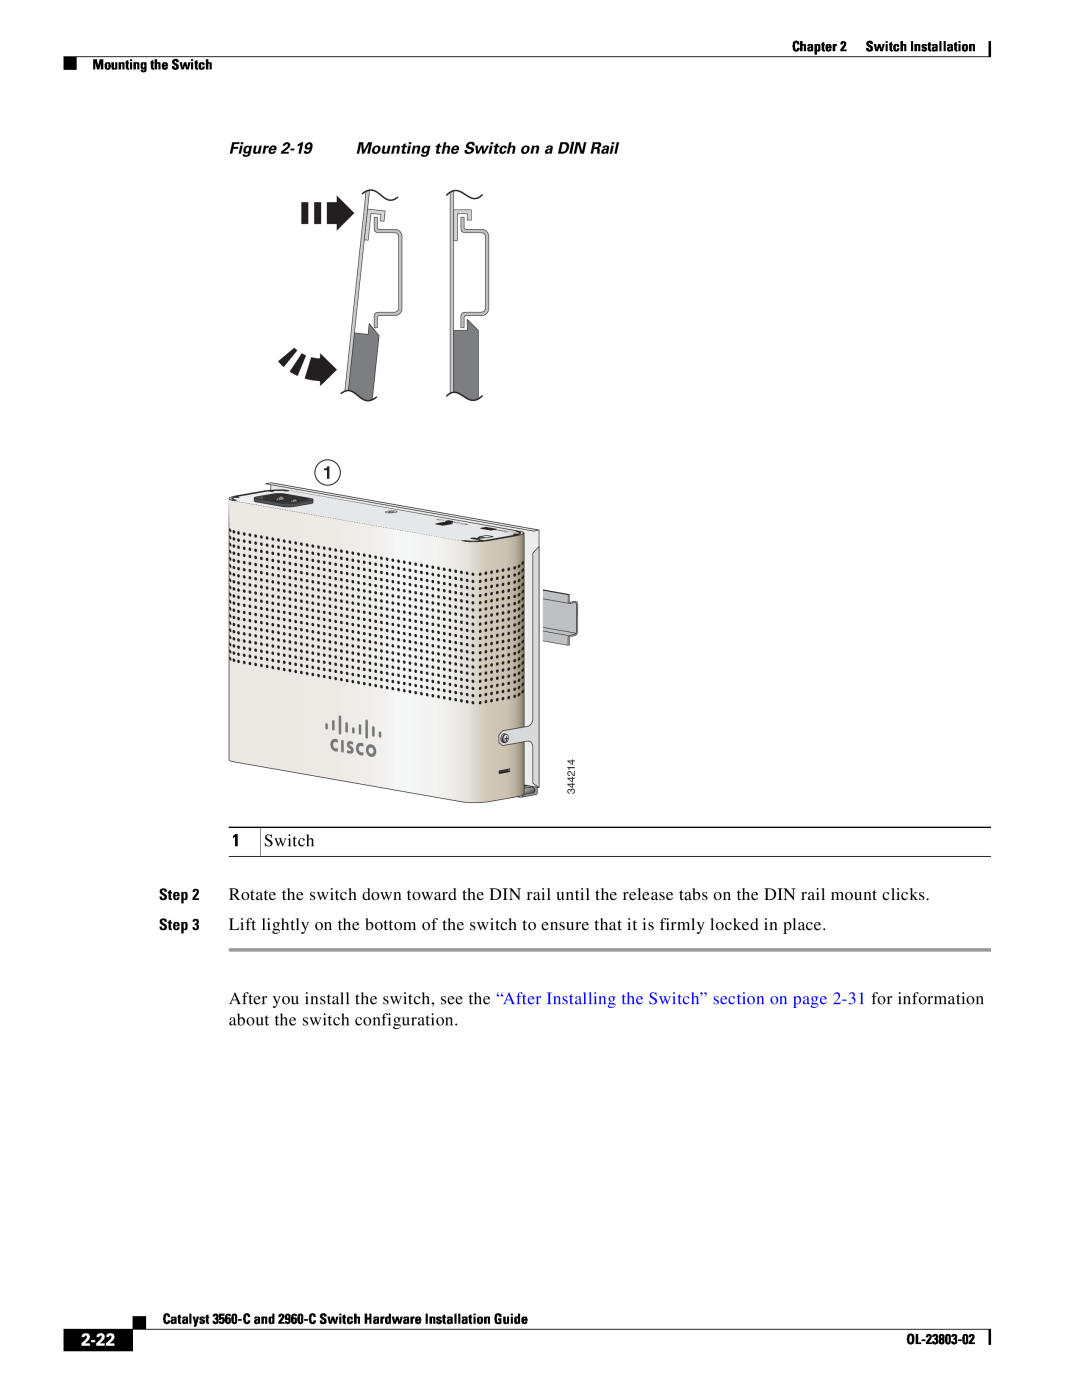 Cisco Systems 3560-C manual 2-22, 19 Mounting the Switch on a DIN Rail 